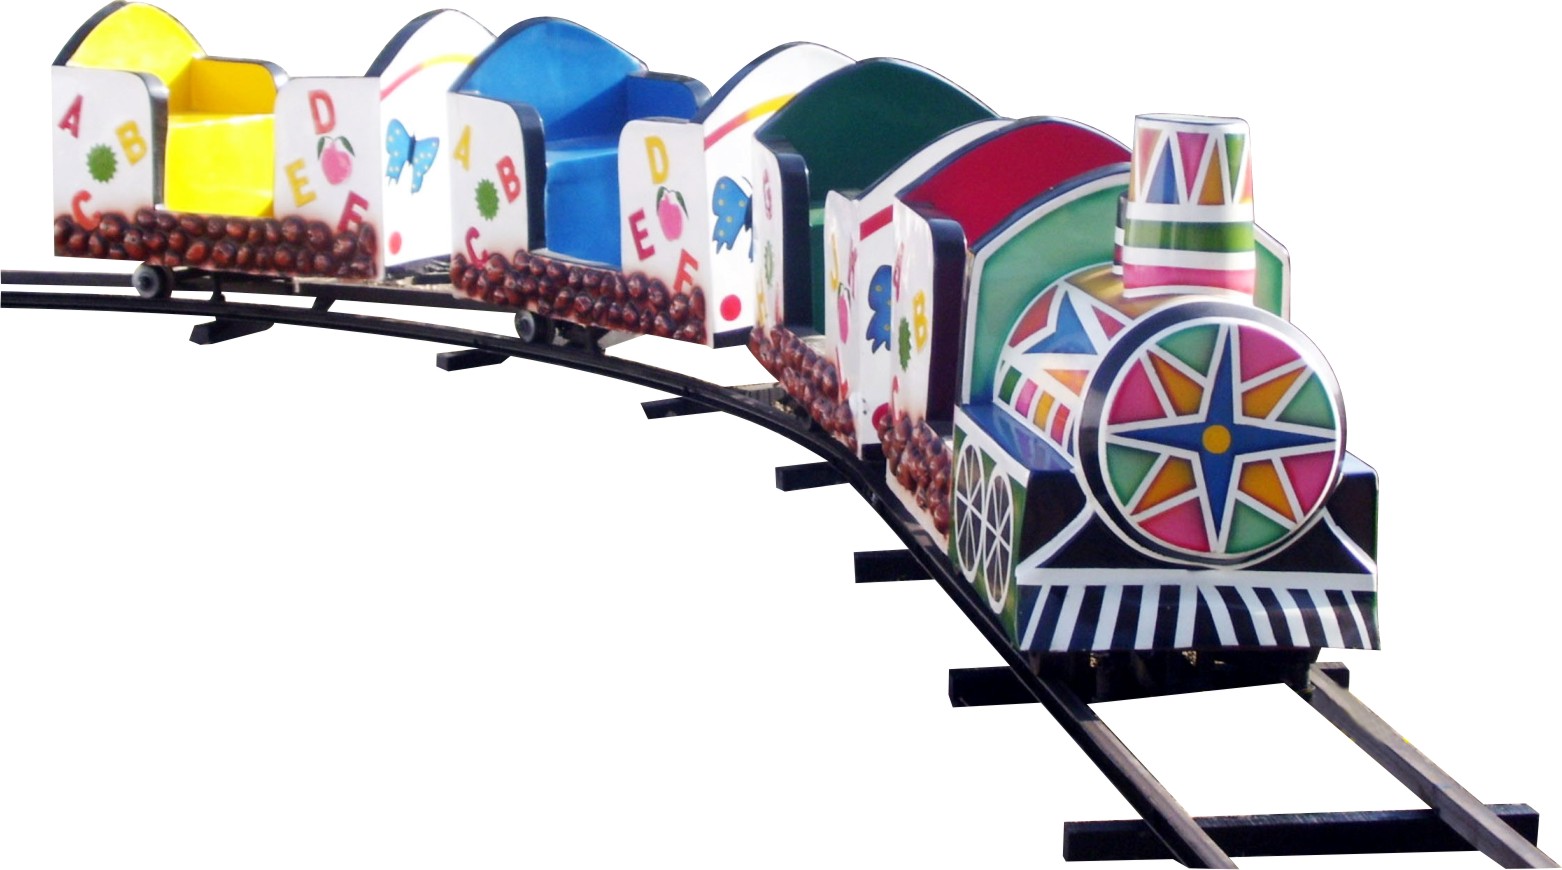 Fiber Non Polished Electric Toy Train, for Playing, Color : Black, Blue, Brown, Green, Yellow